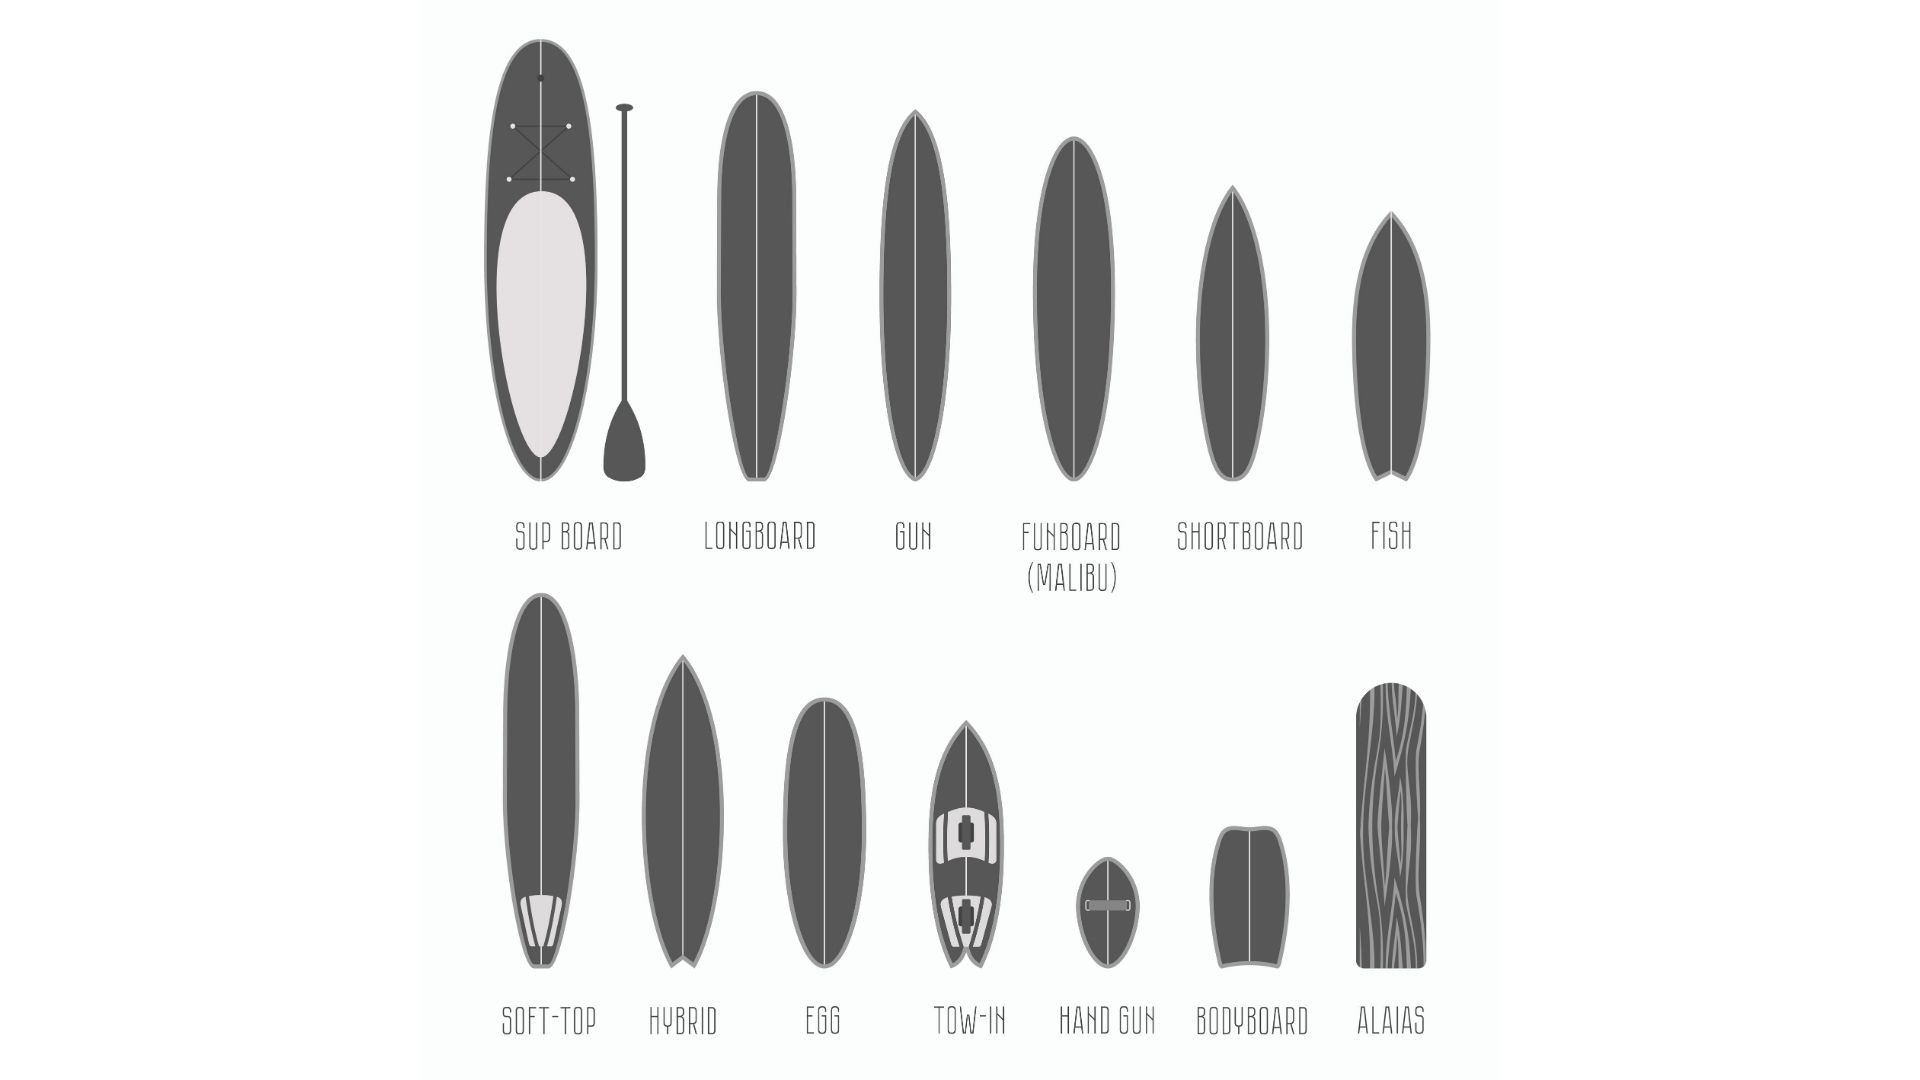 What Surfboard Size Should I Get? - Surf Indonesia